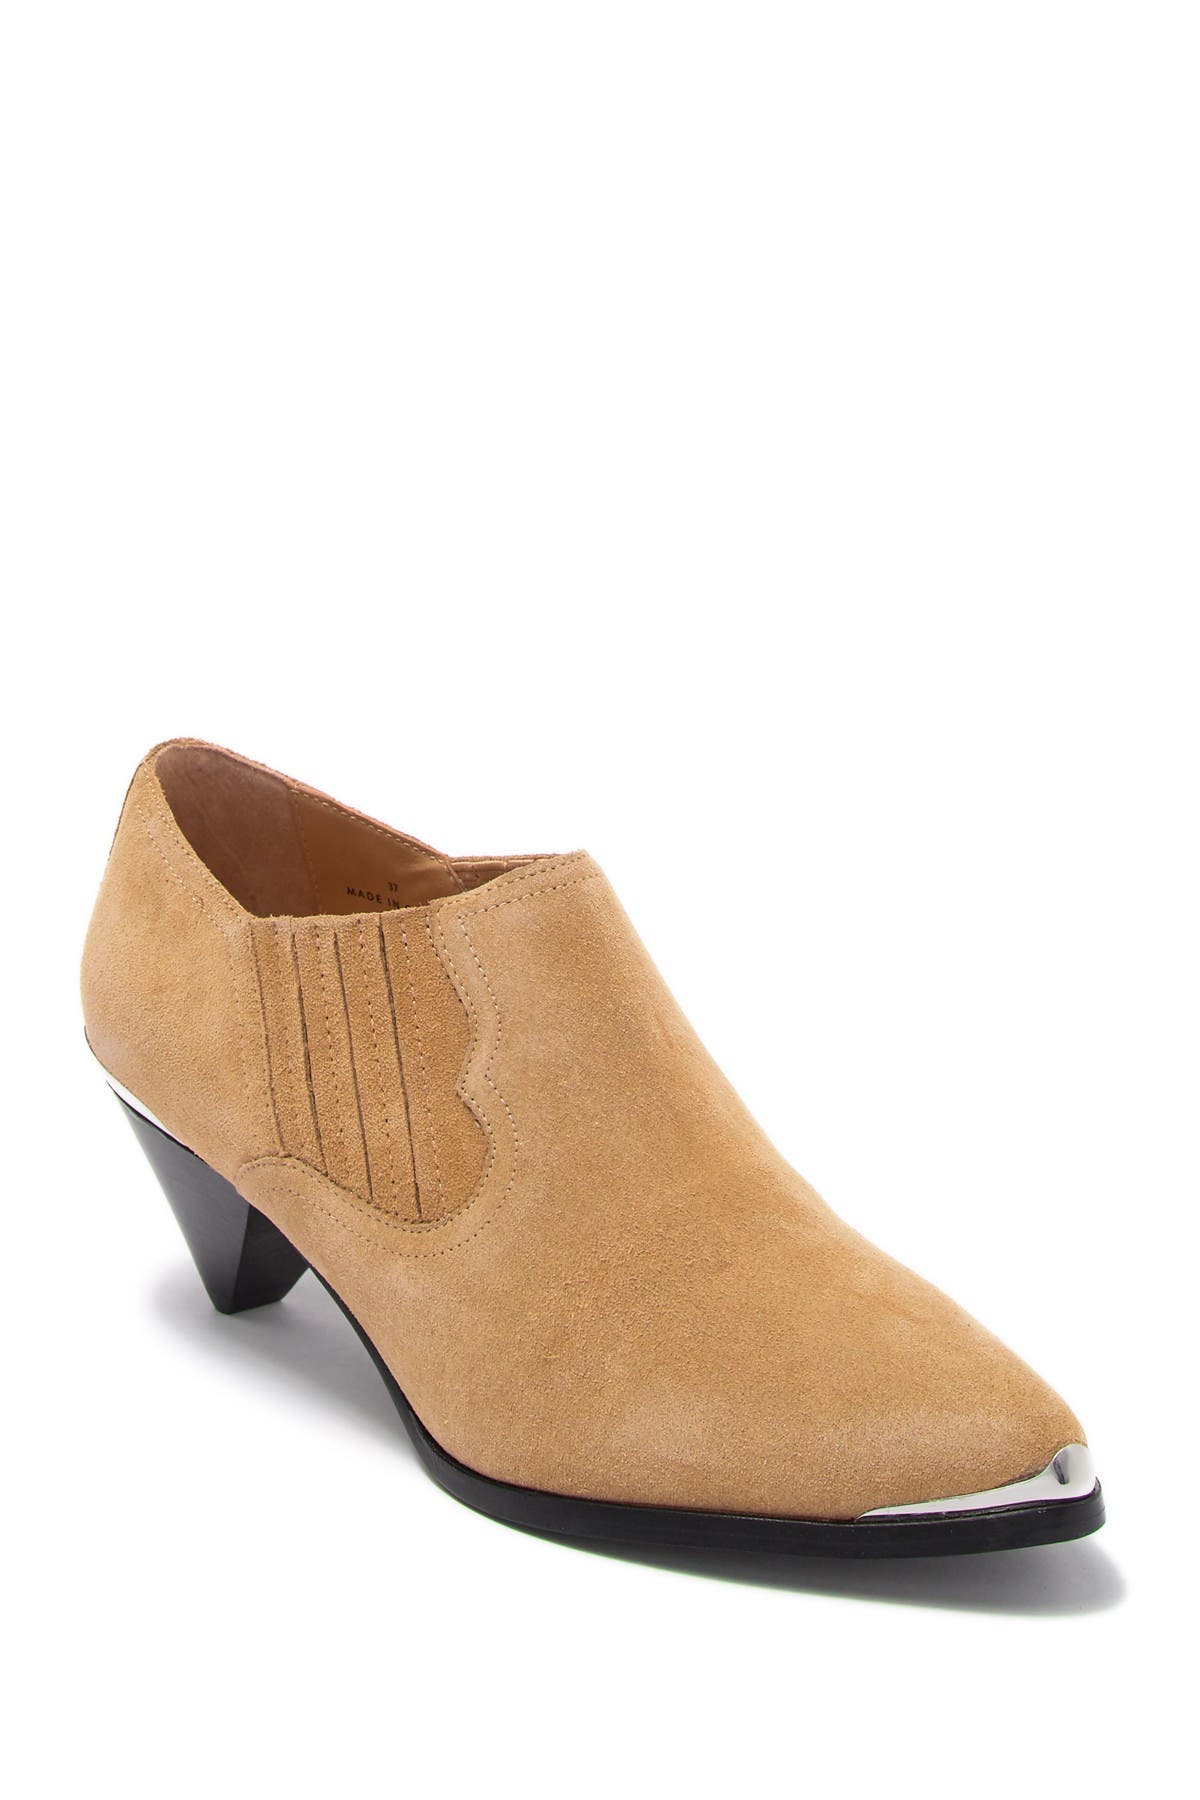 joie shoes nordstrom